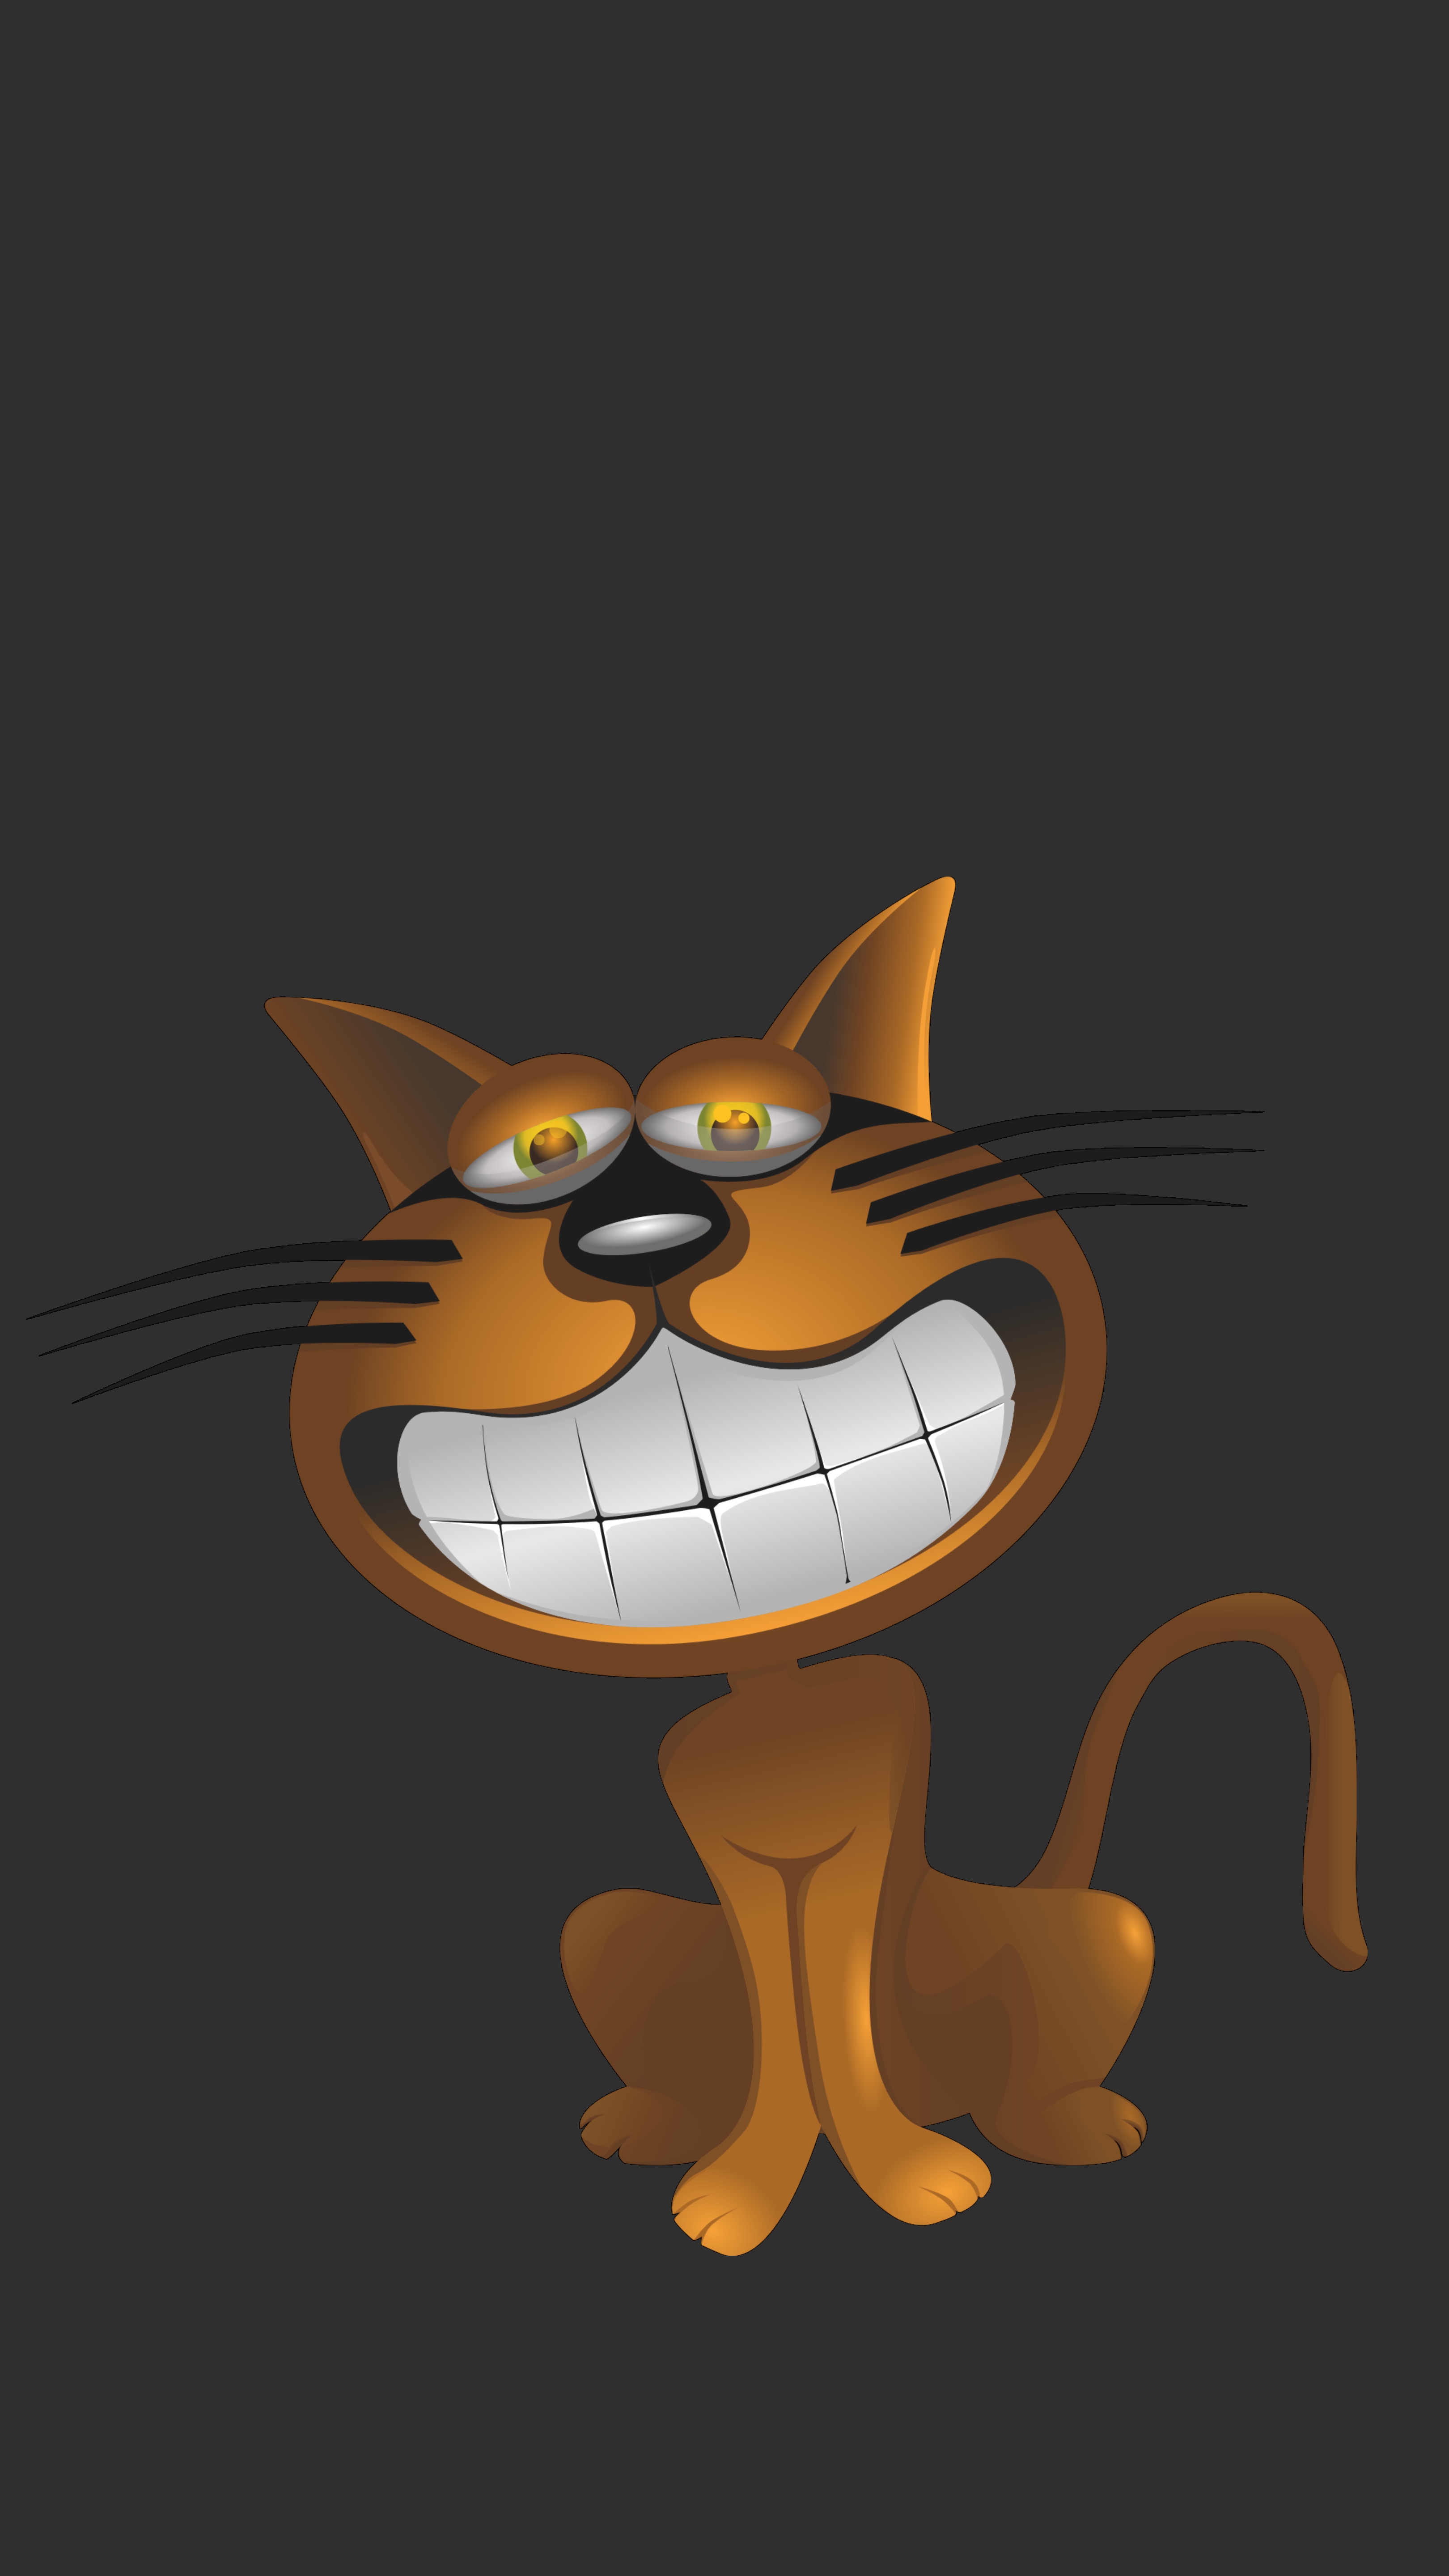 smile, funny, vector, cat, caricature iphone wallpaper